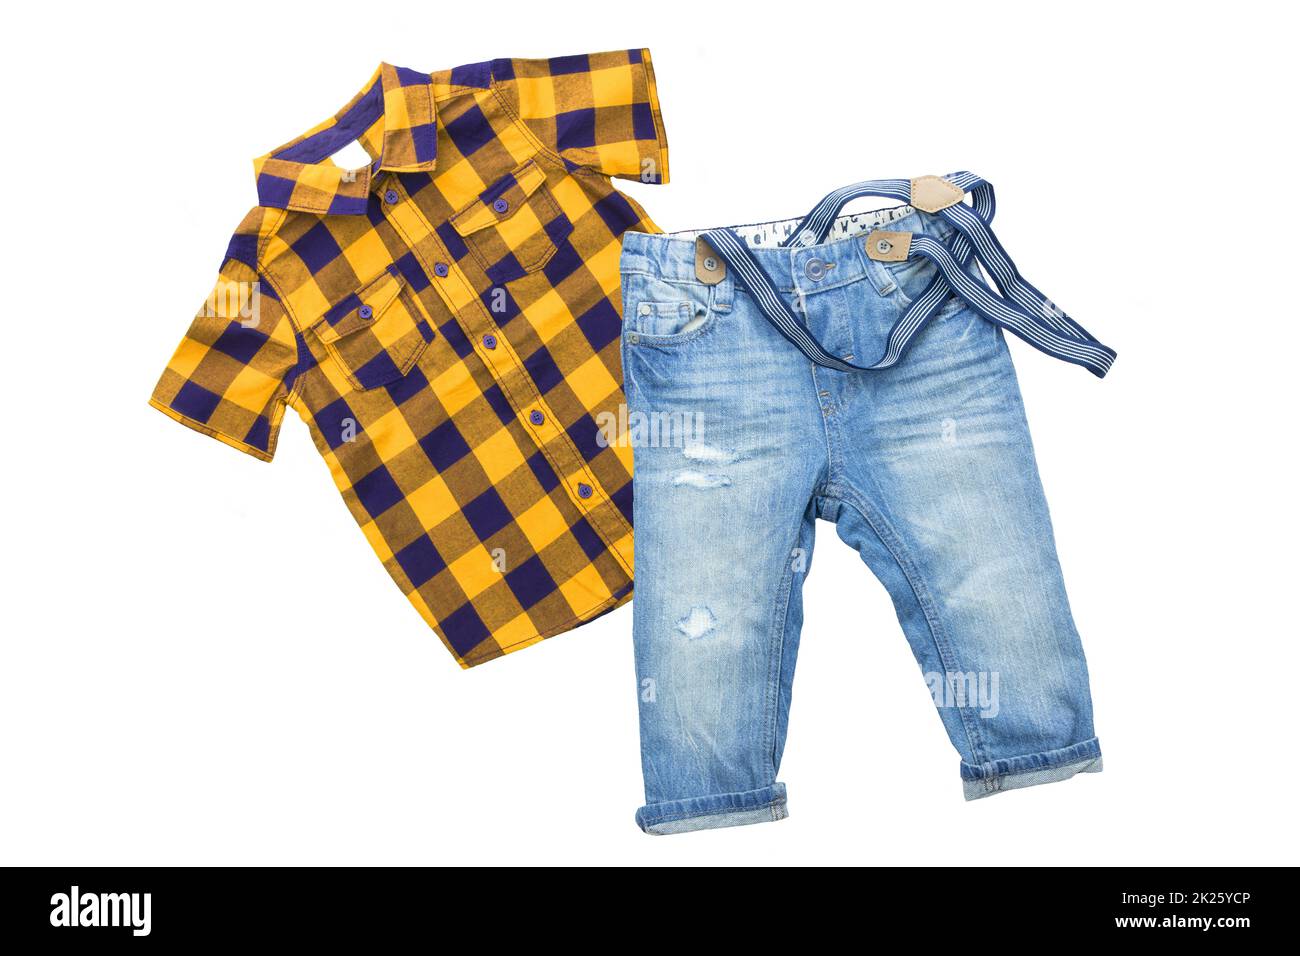 Fashionable blue jeans with braces or suspenders for child boy and a yellow blue checkered shirt with short sleeves isolated on a white background. Kids summer clothes. Stock Photo